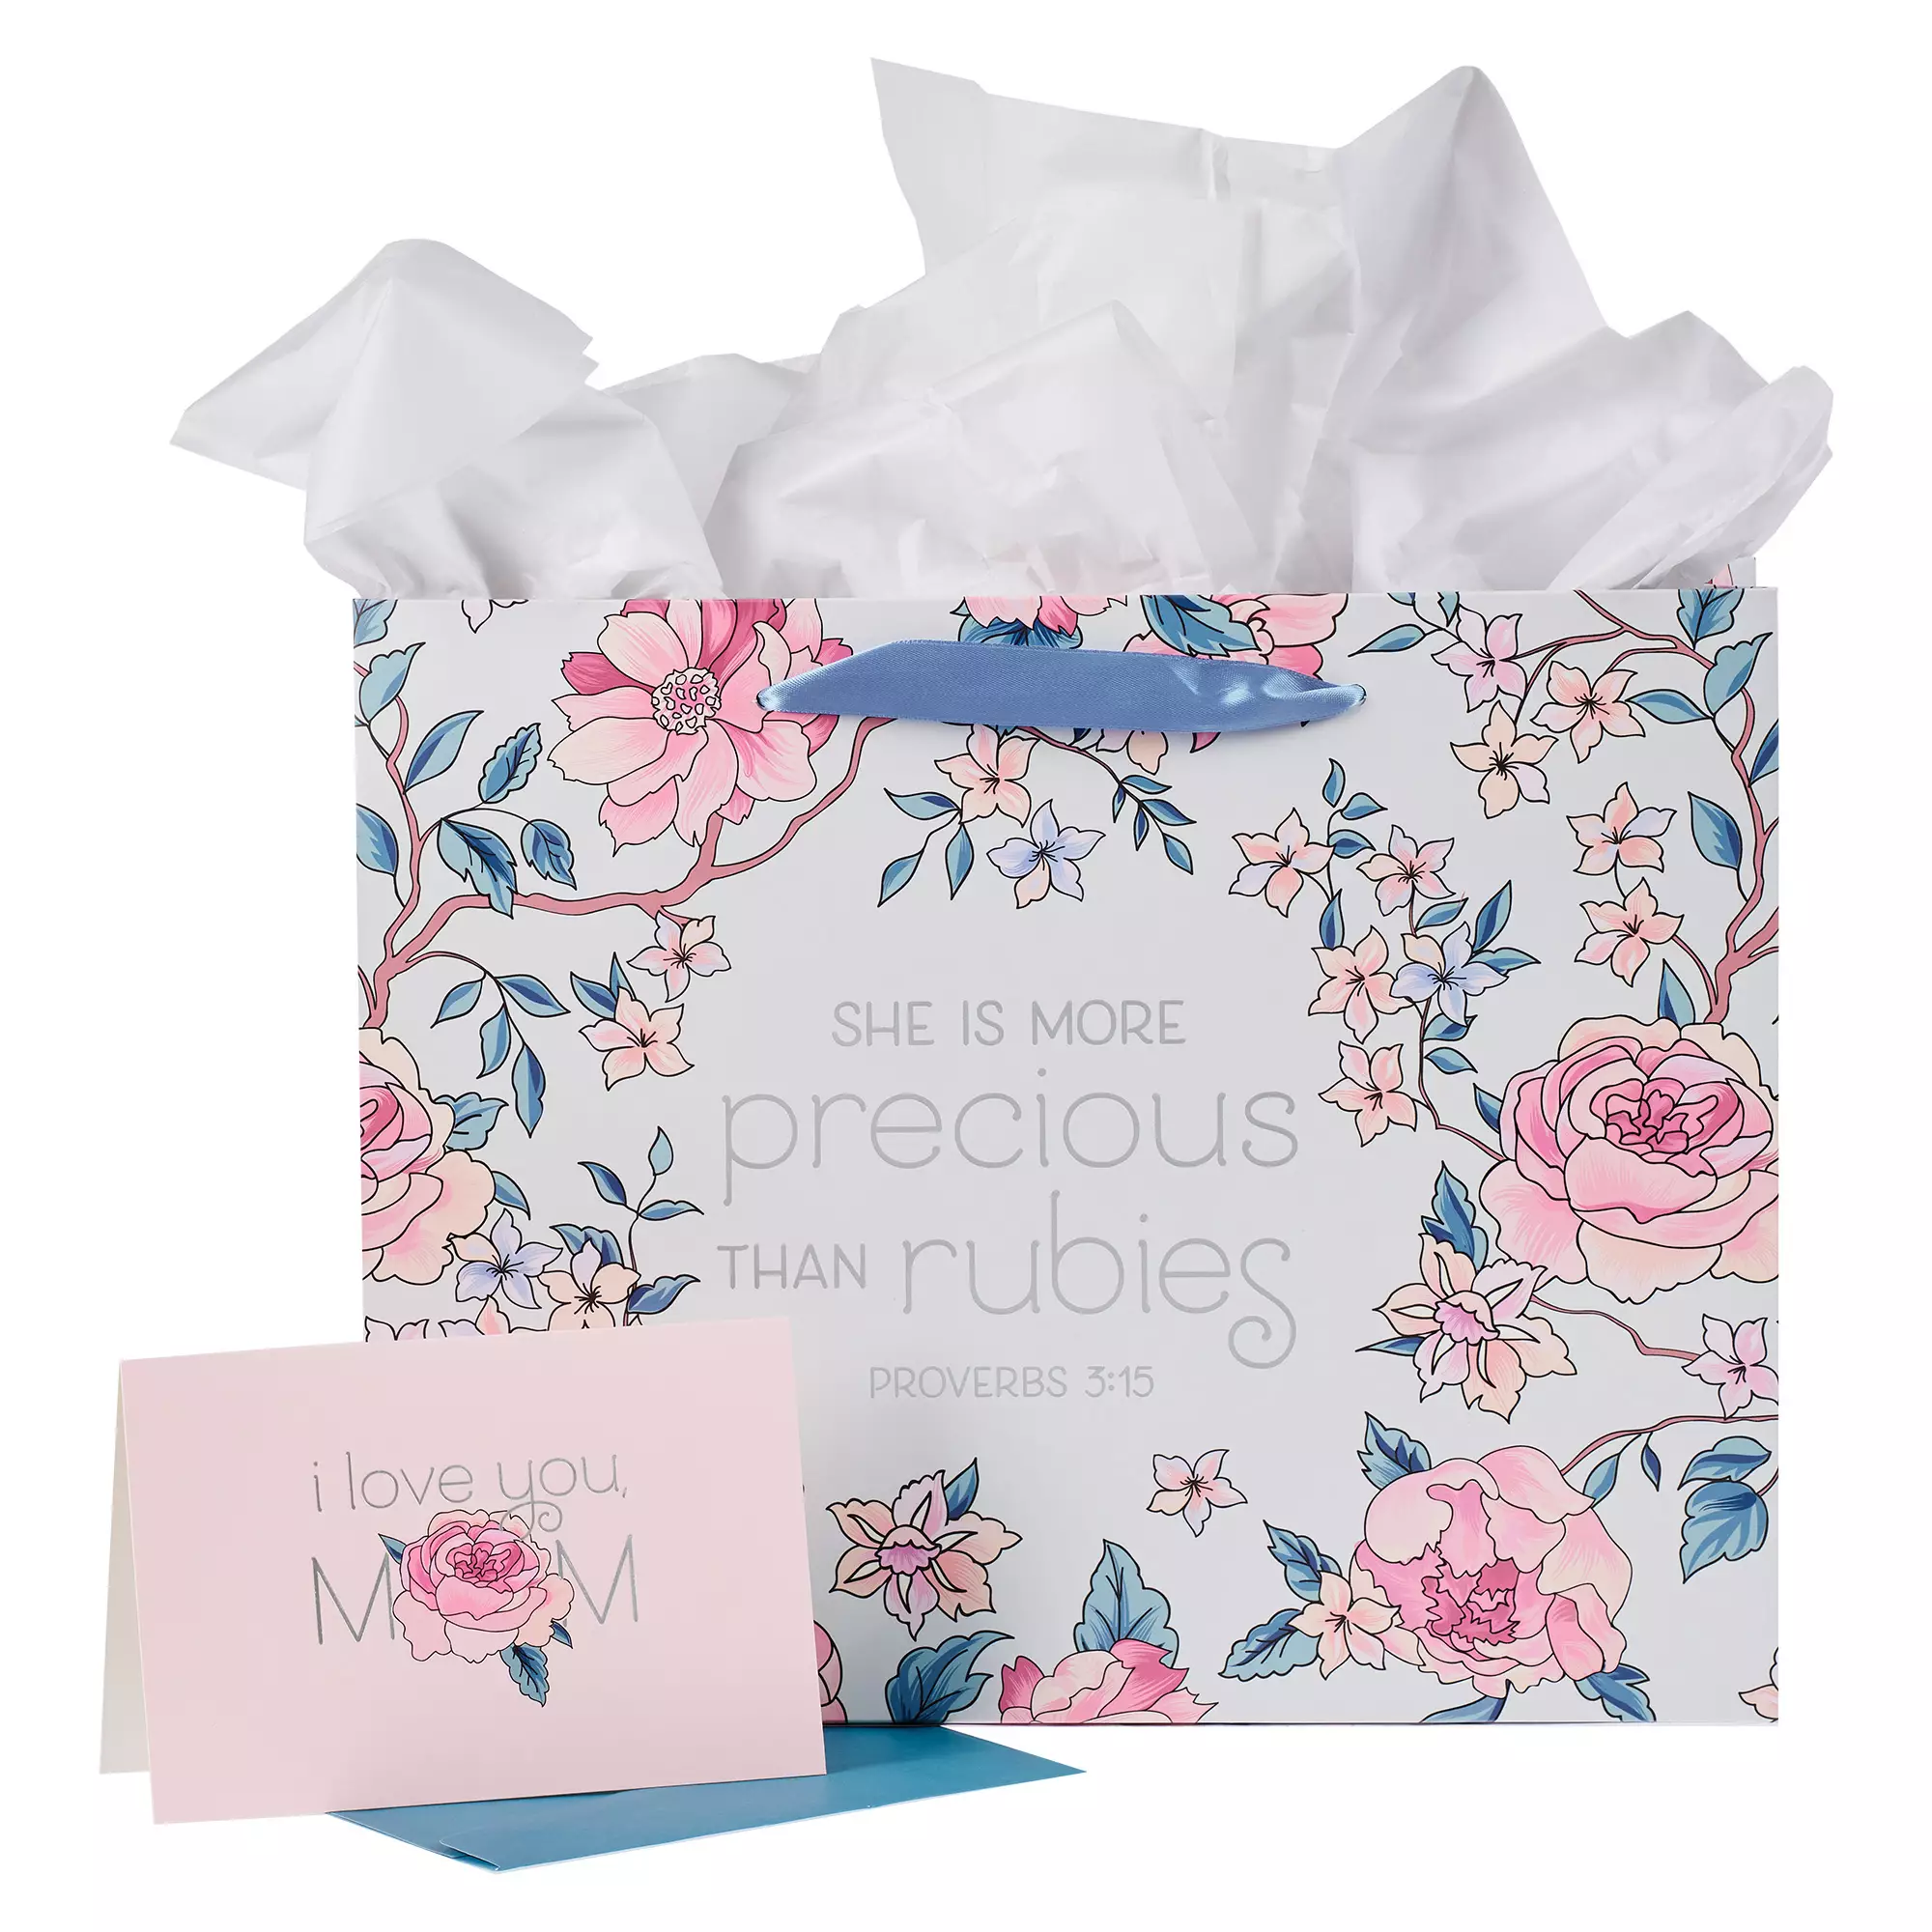 Christian Art Gifts Landscape Gift Bag with Card and Tissue Paper Set: More Precious Than Rubies - Proverbs 3:15, Pink, Large